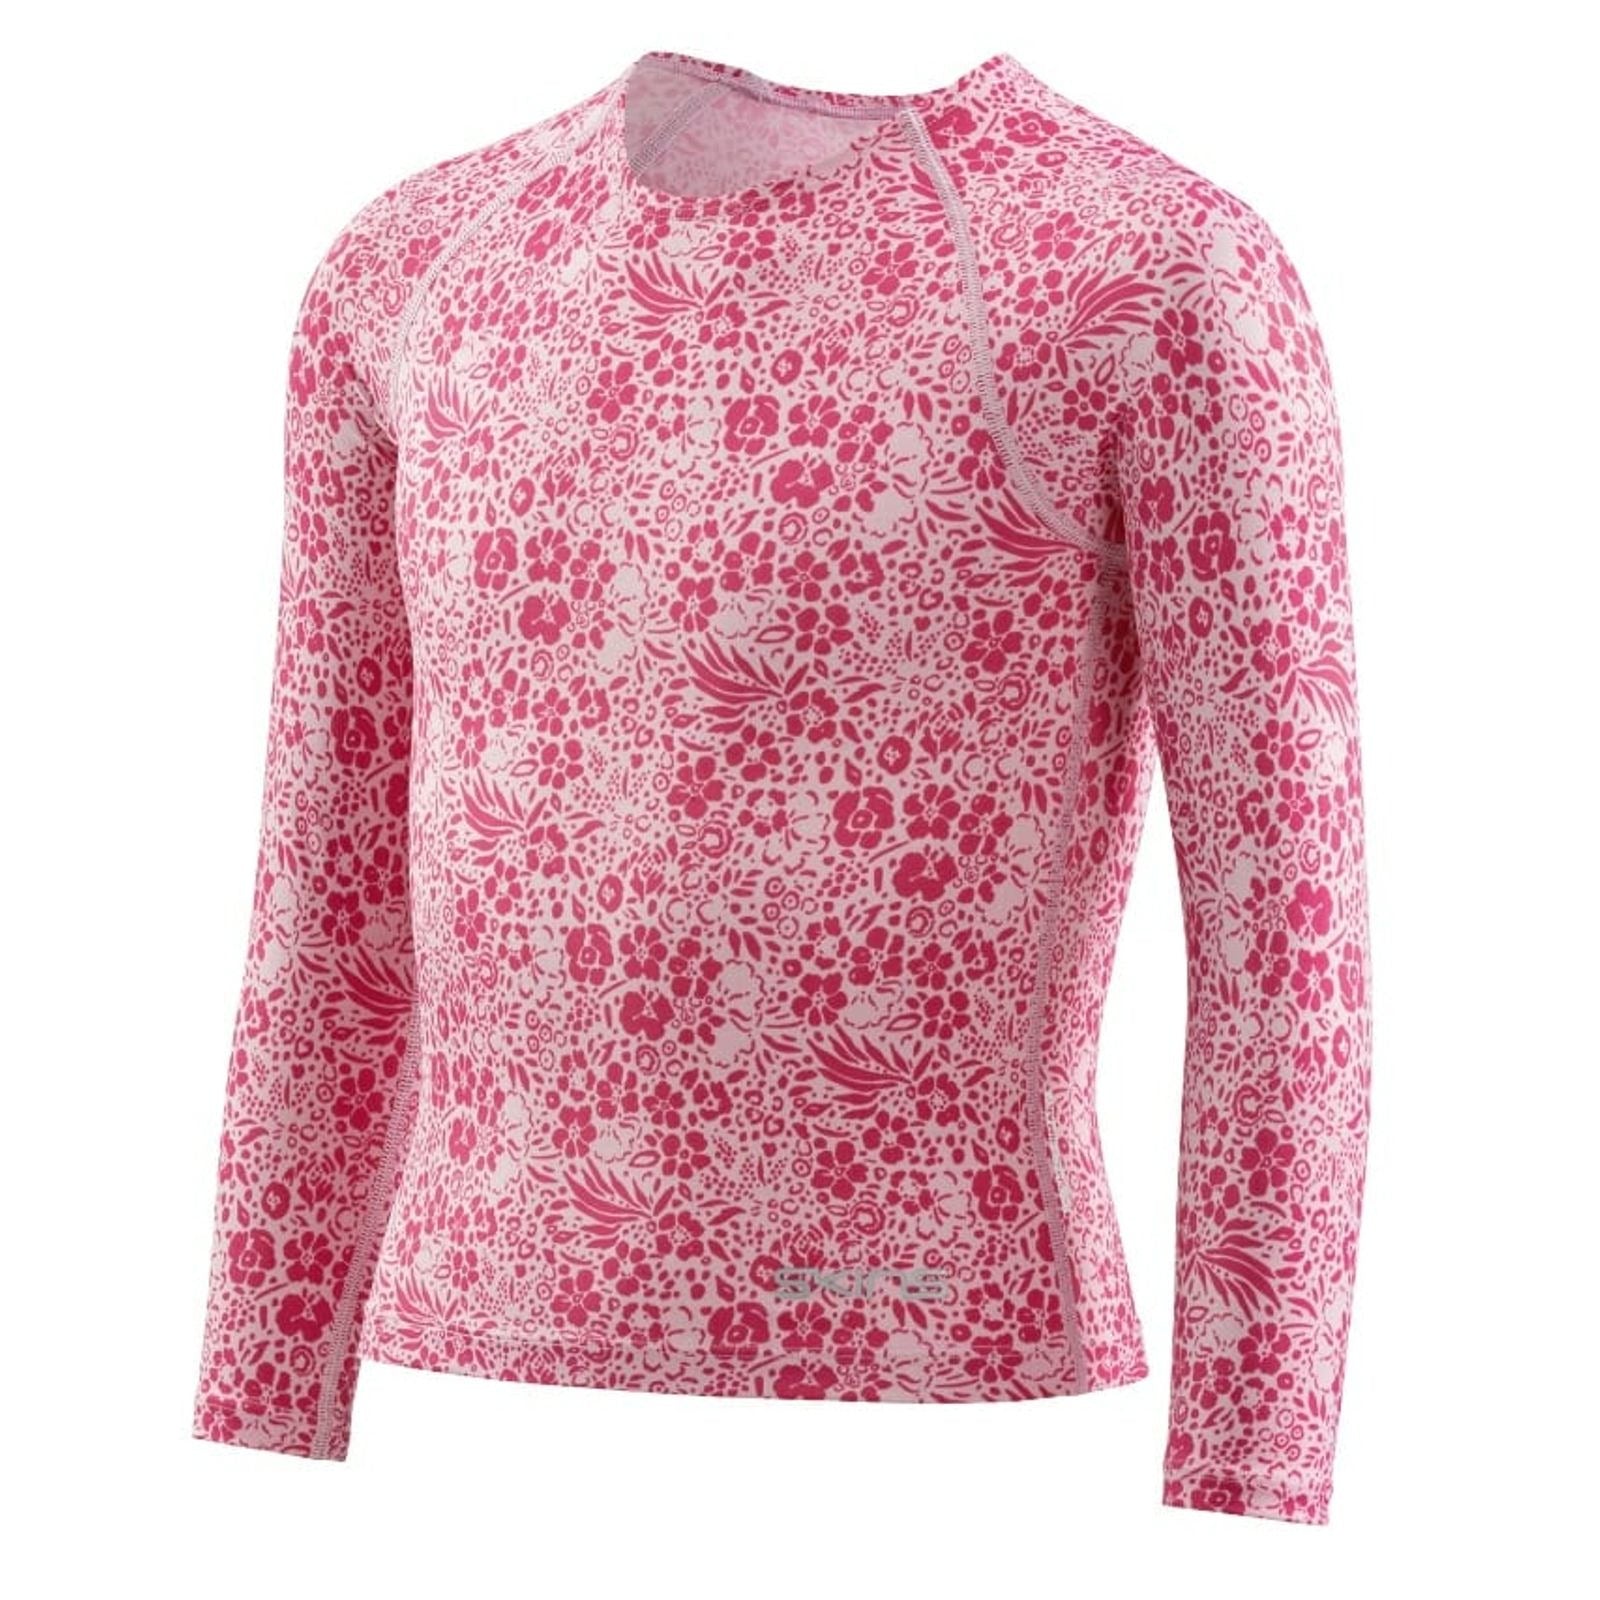 SKINS Youth DNAmic Primary Long Sleeve Top - Floral